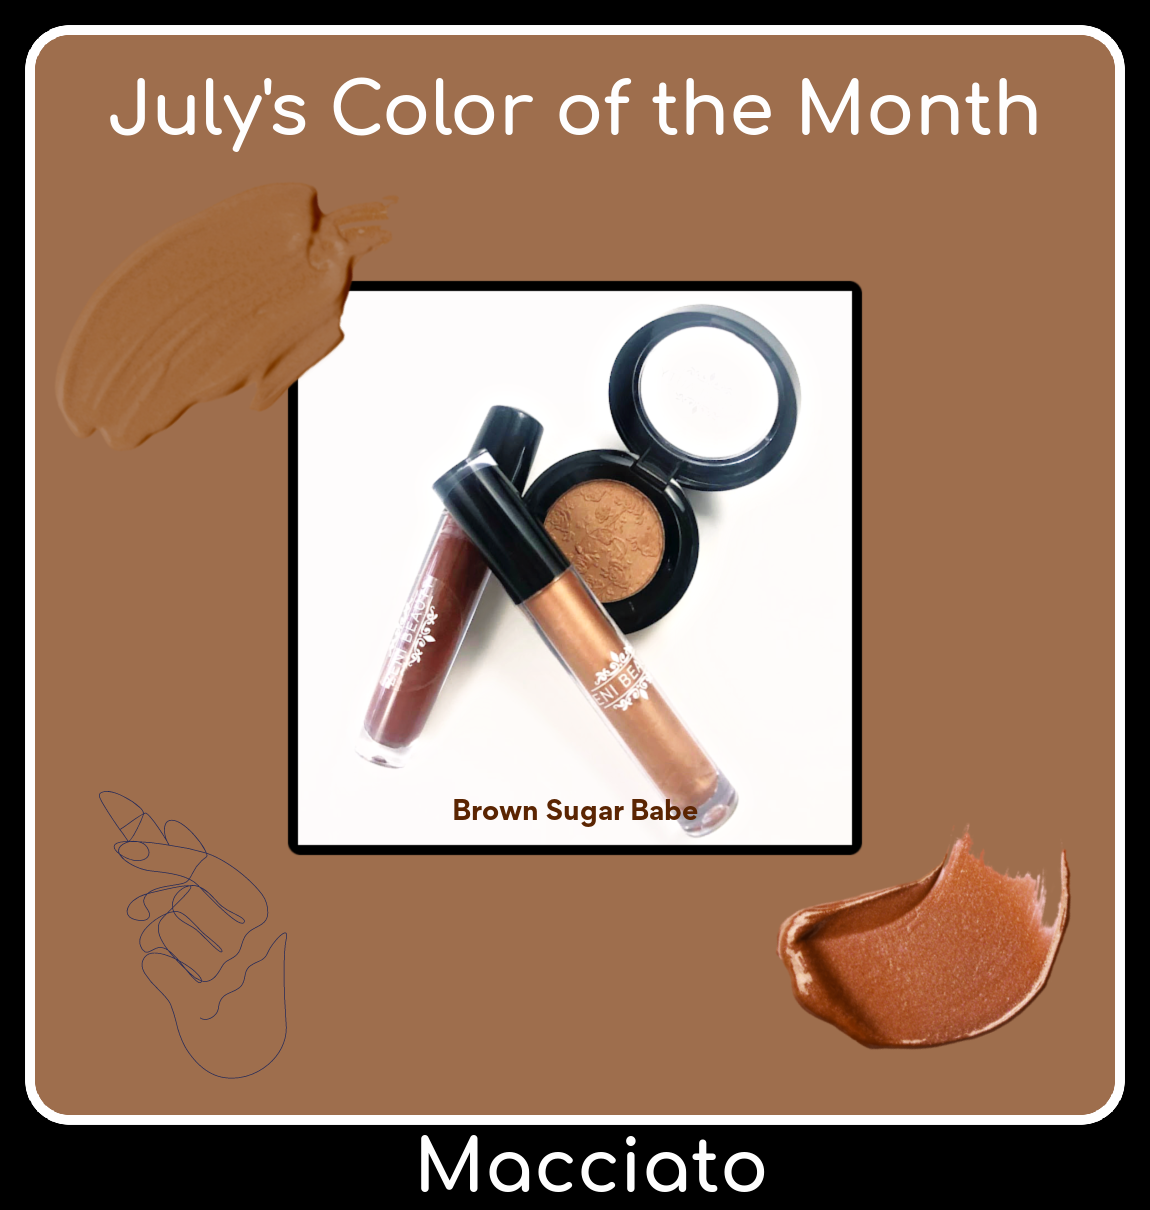 July's Color of the Month is Macchiato